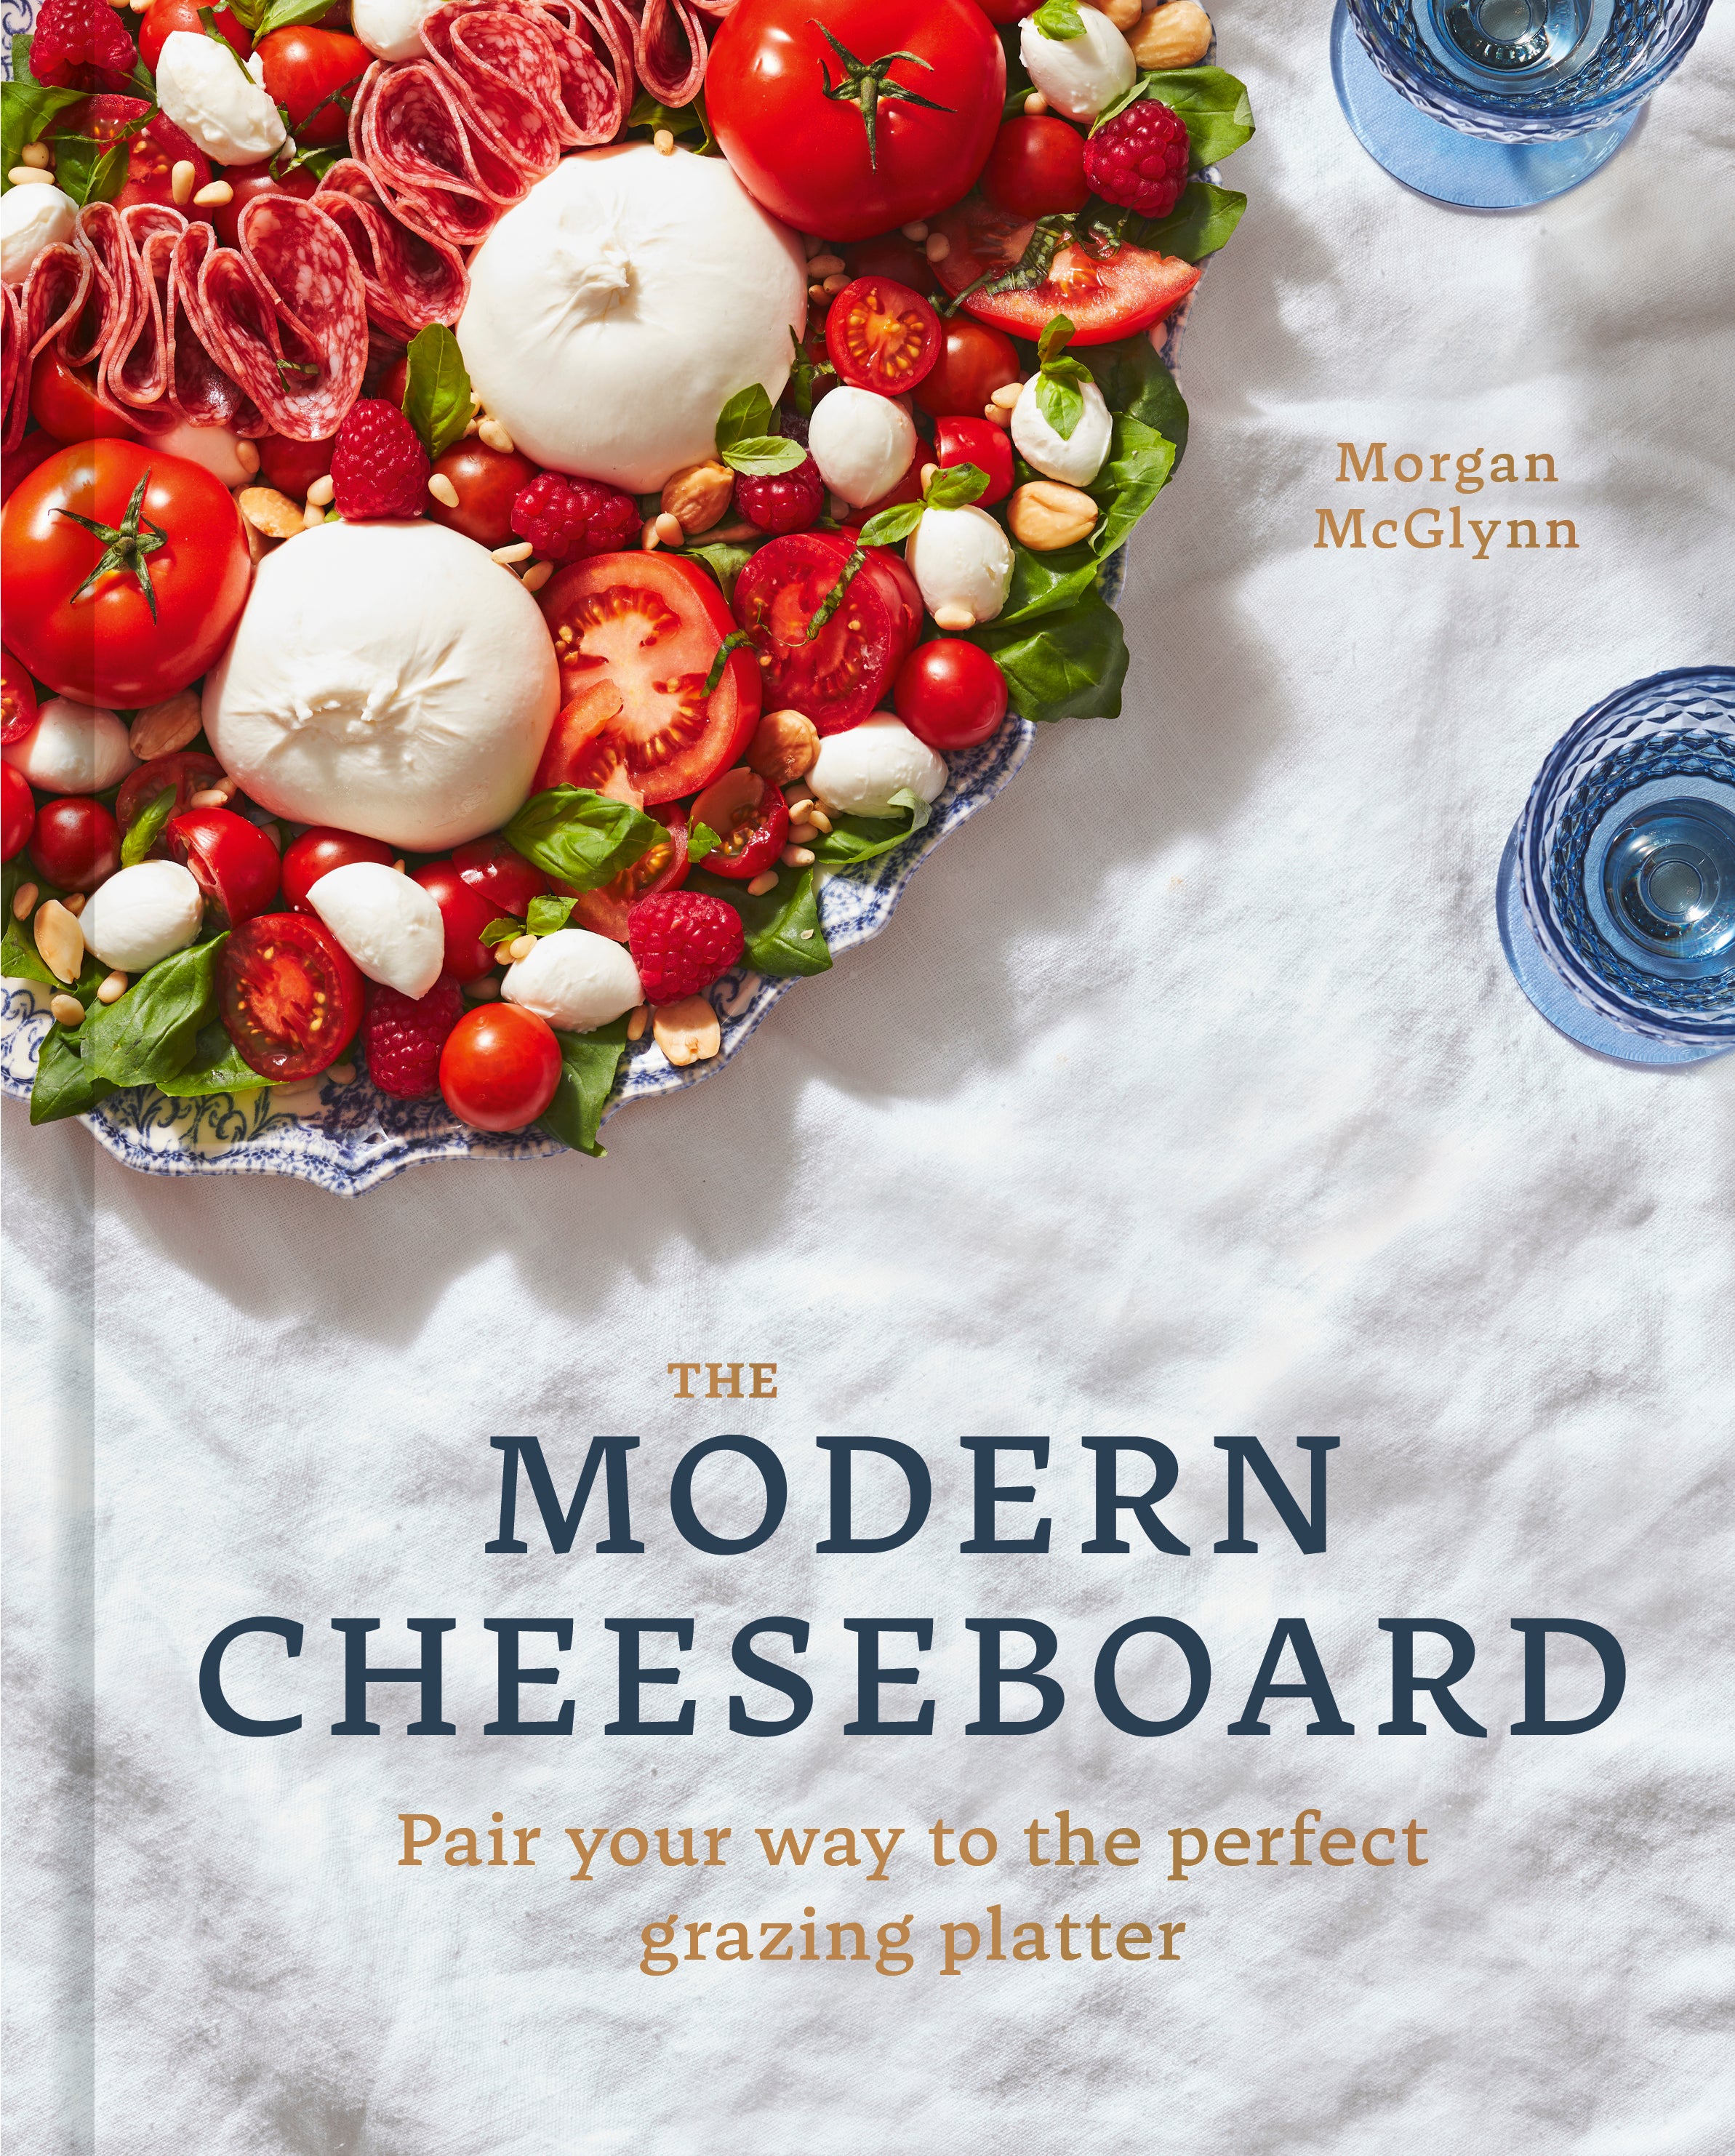 If you love cheese as much as Olivia Campbell does, you’ll love this book